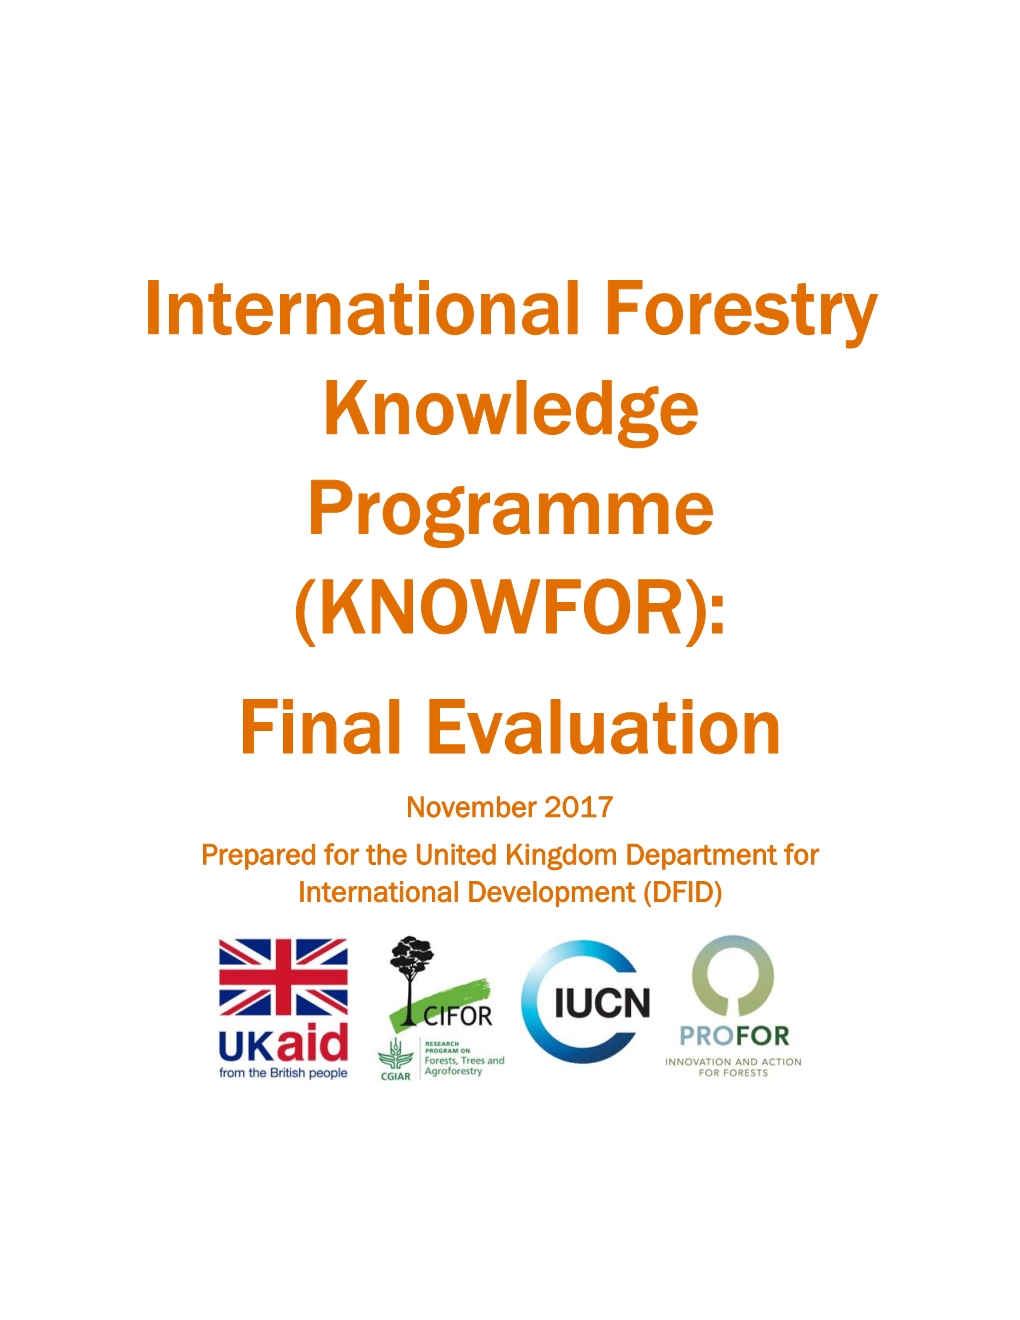 International Forestry Knowledge Programme (KNOWFOR): Final Evaluation November 2017 Prepared for the United Kingdom Department for International Development (DFID)